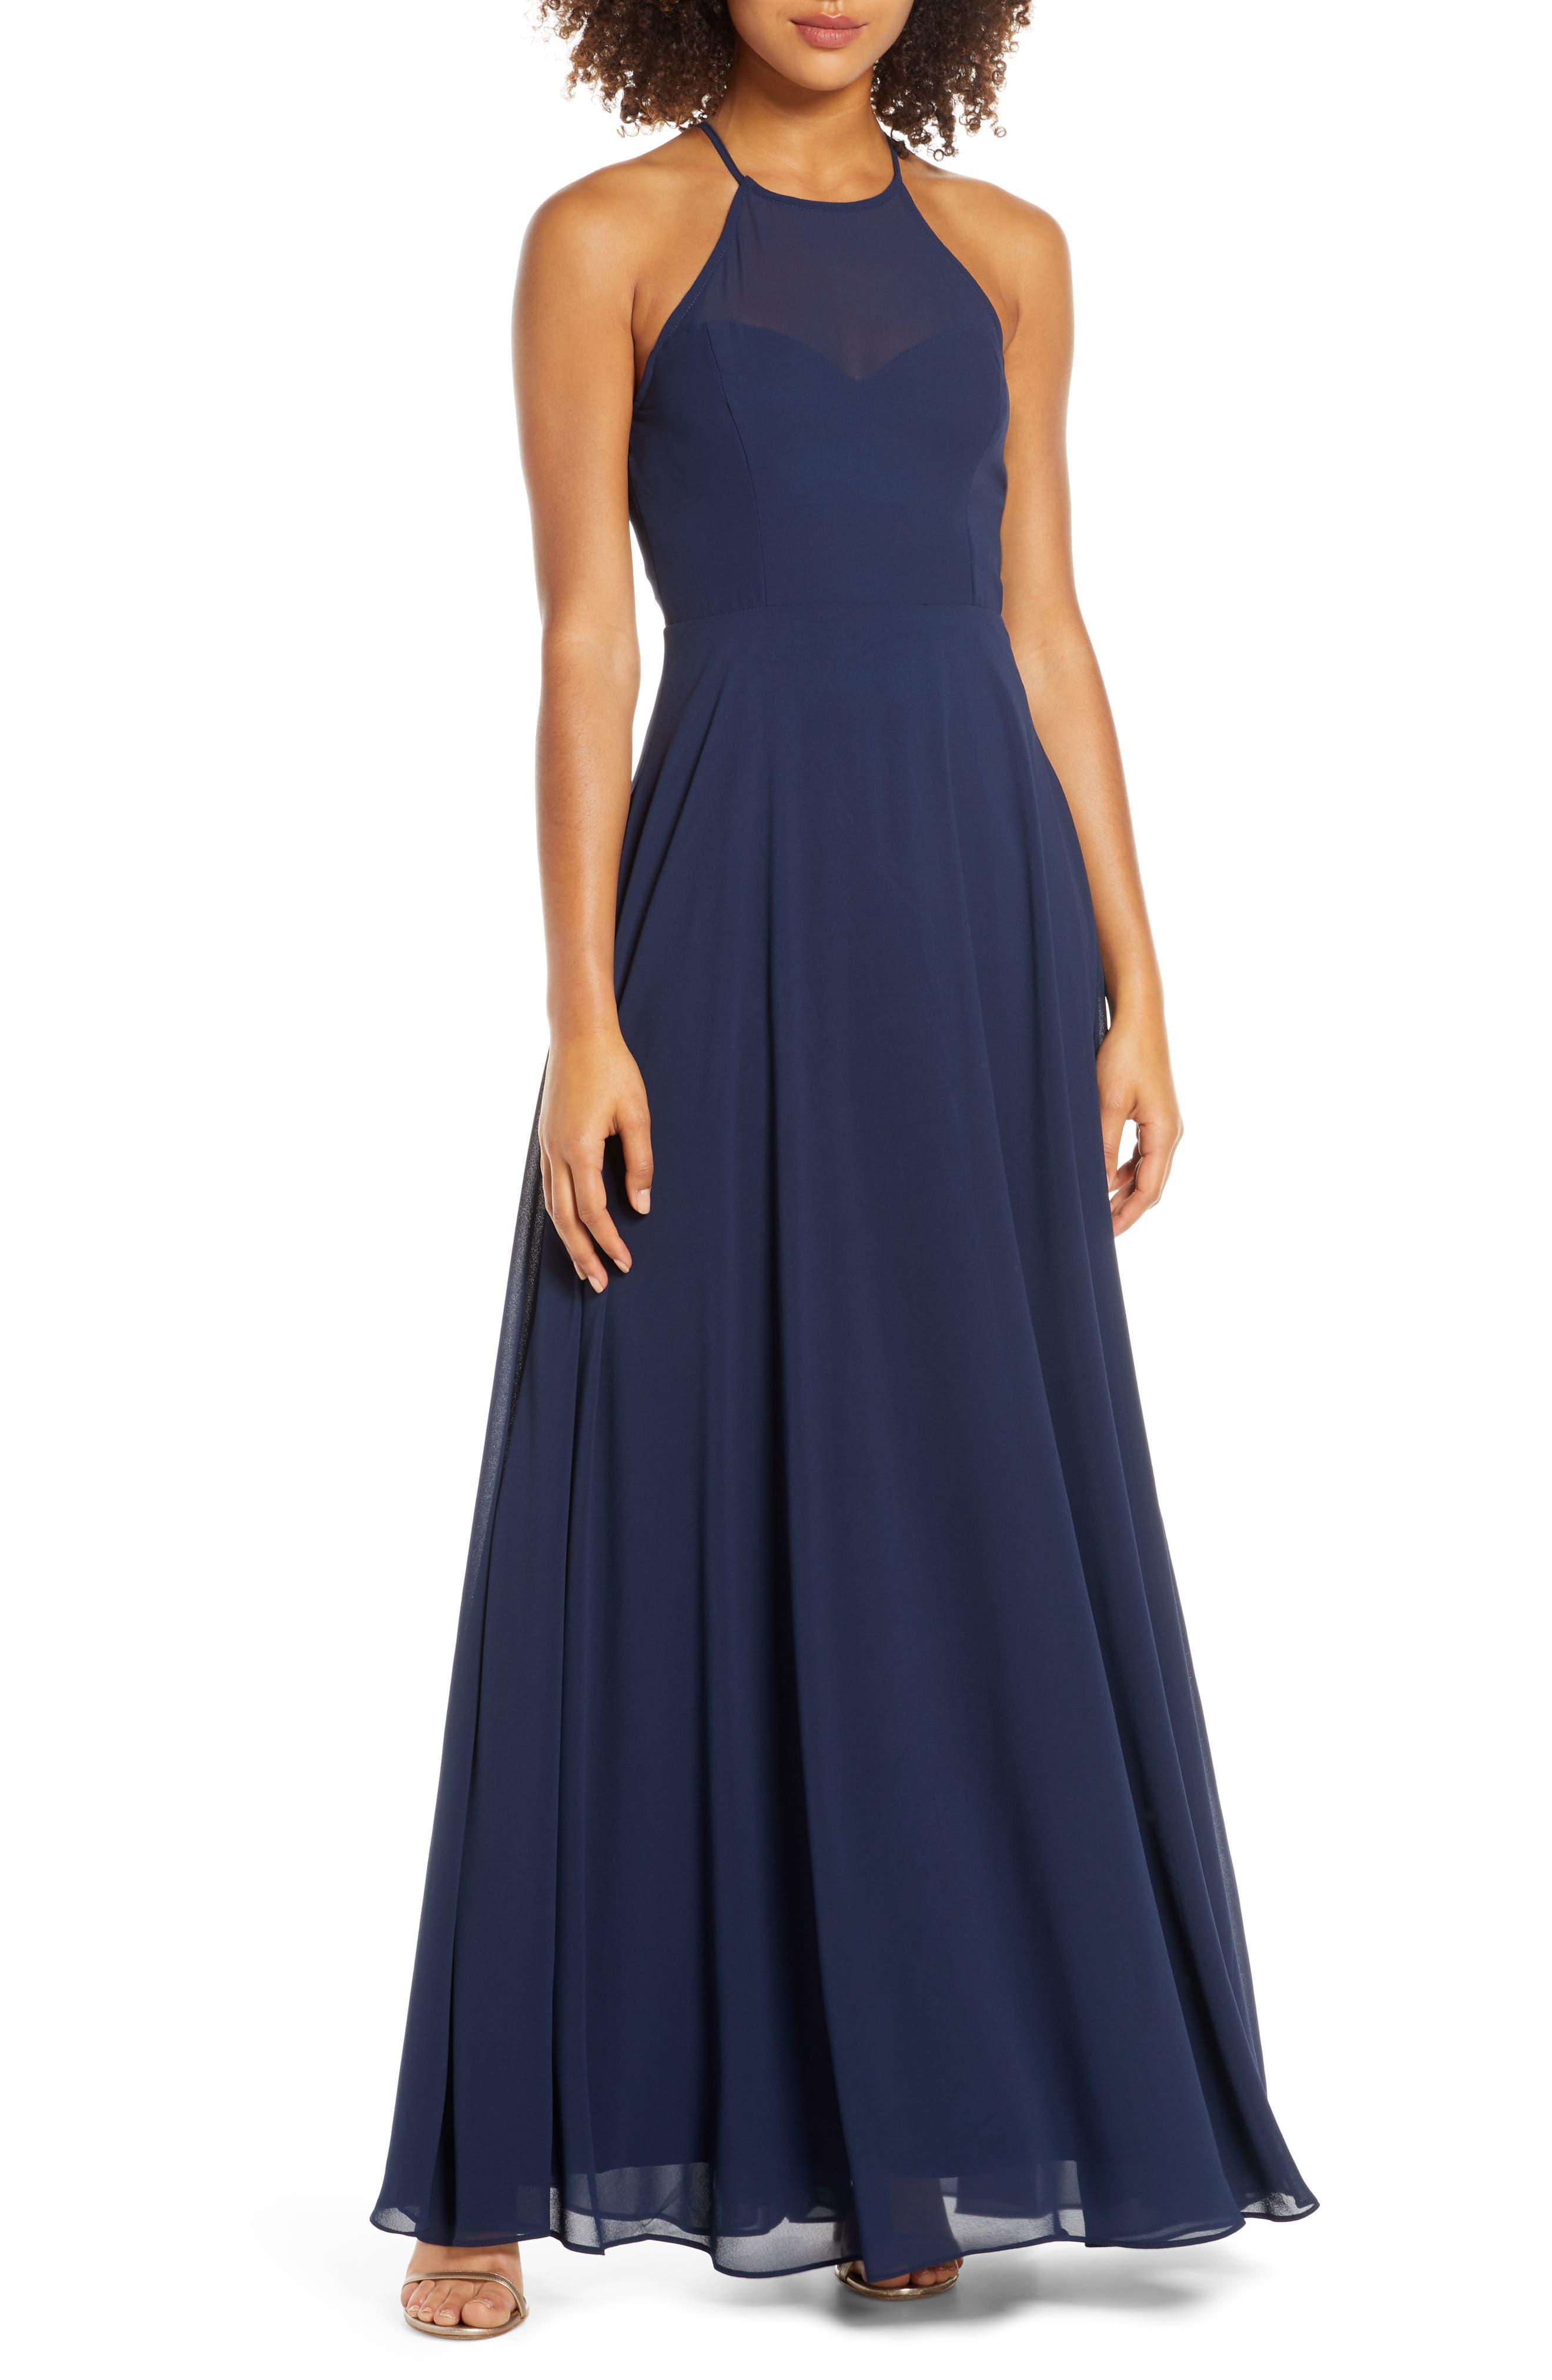 Vintage Inspired Evening Dresses, Gowns and Formal Wear